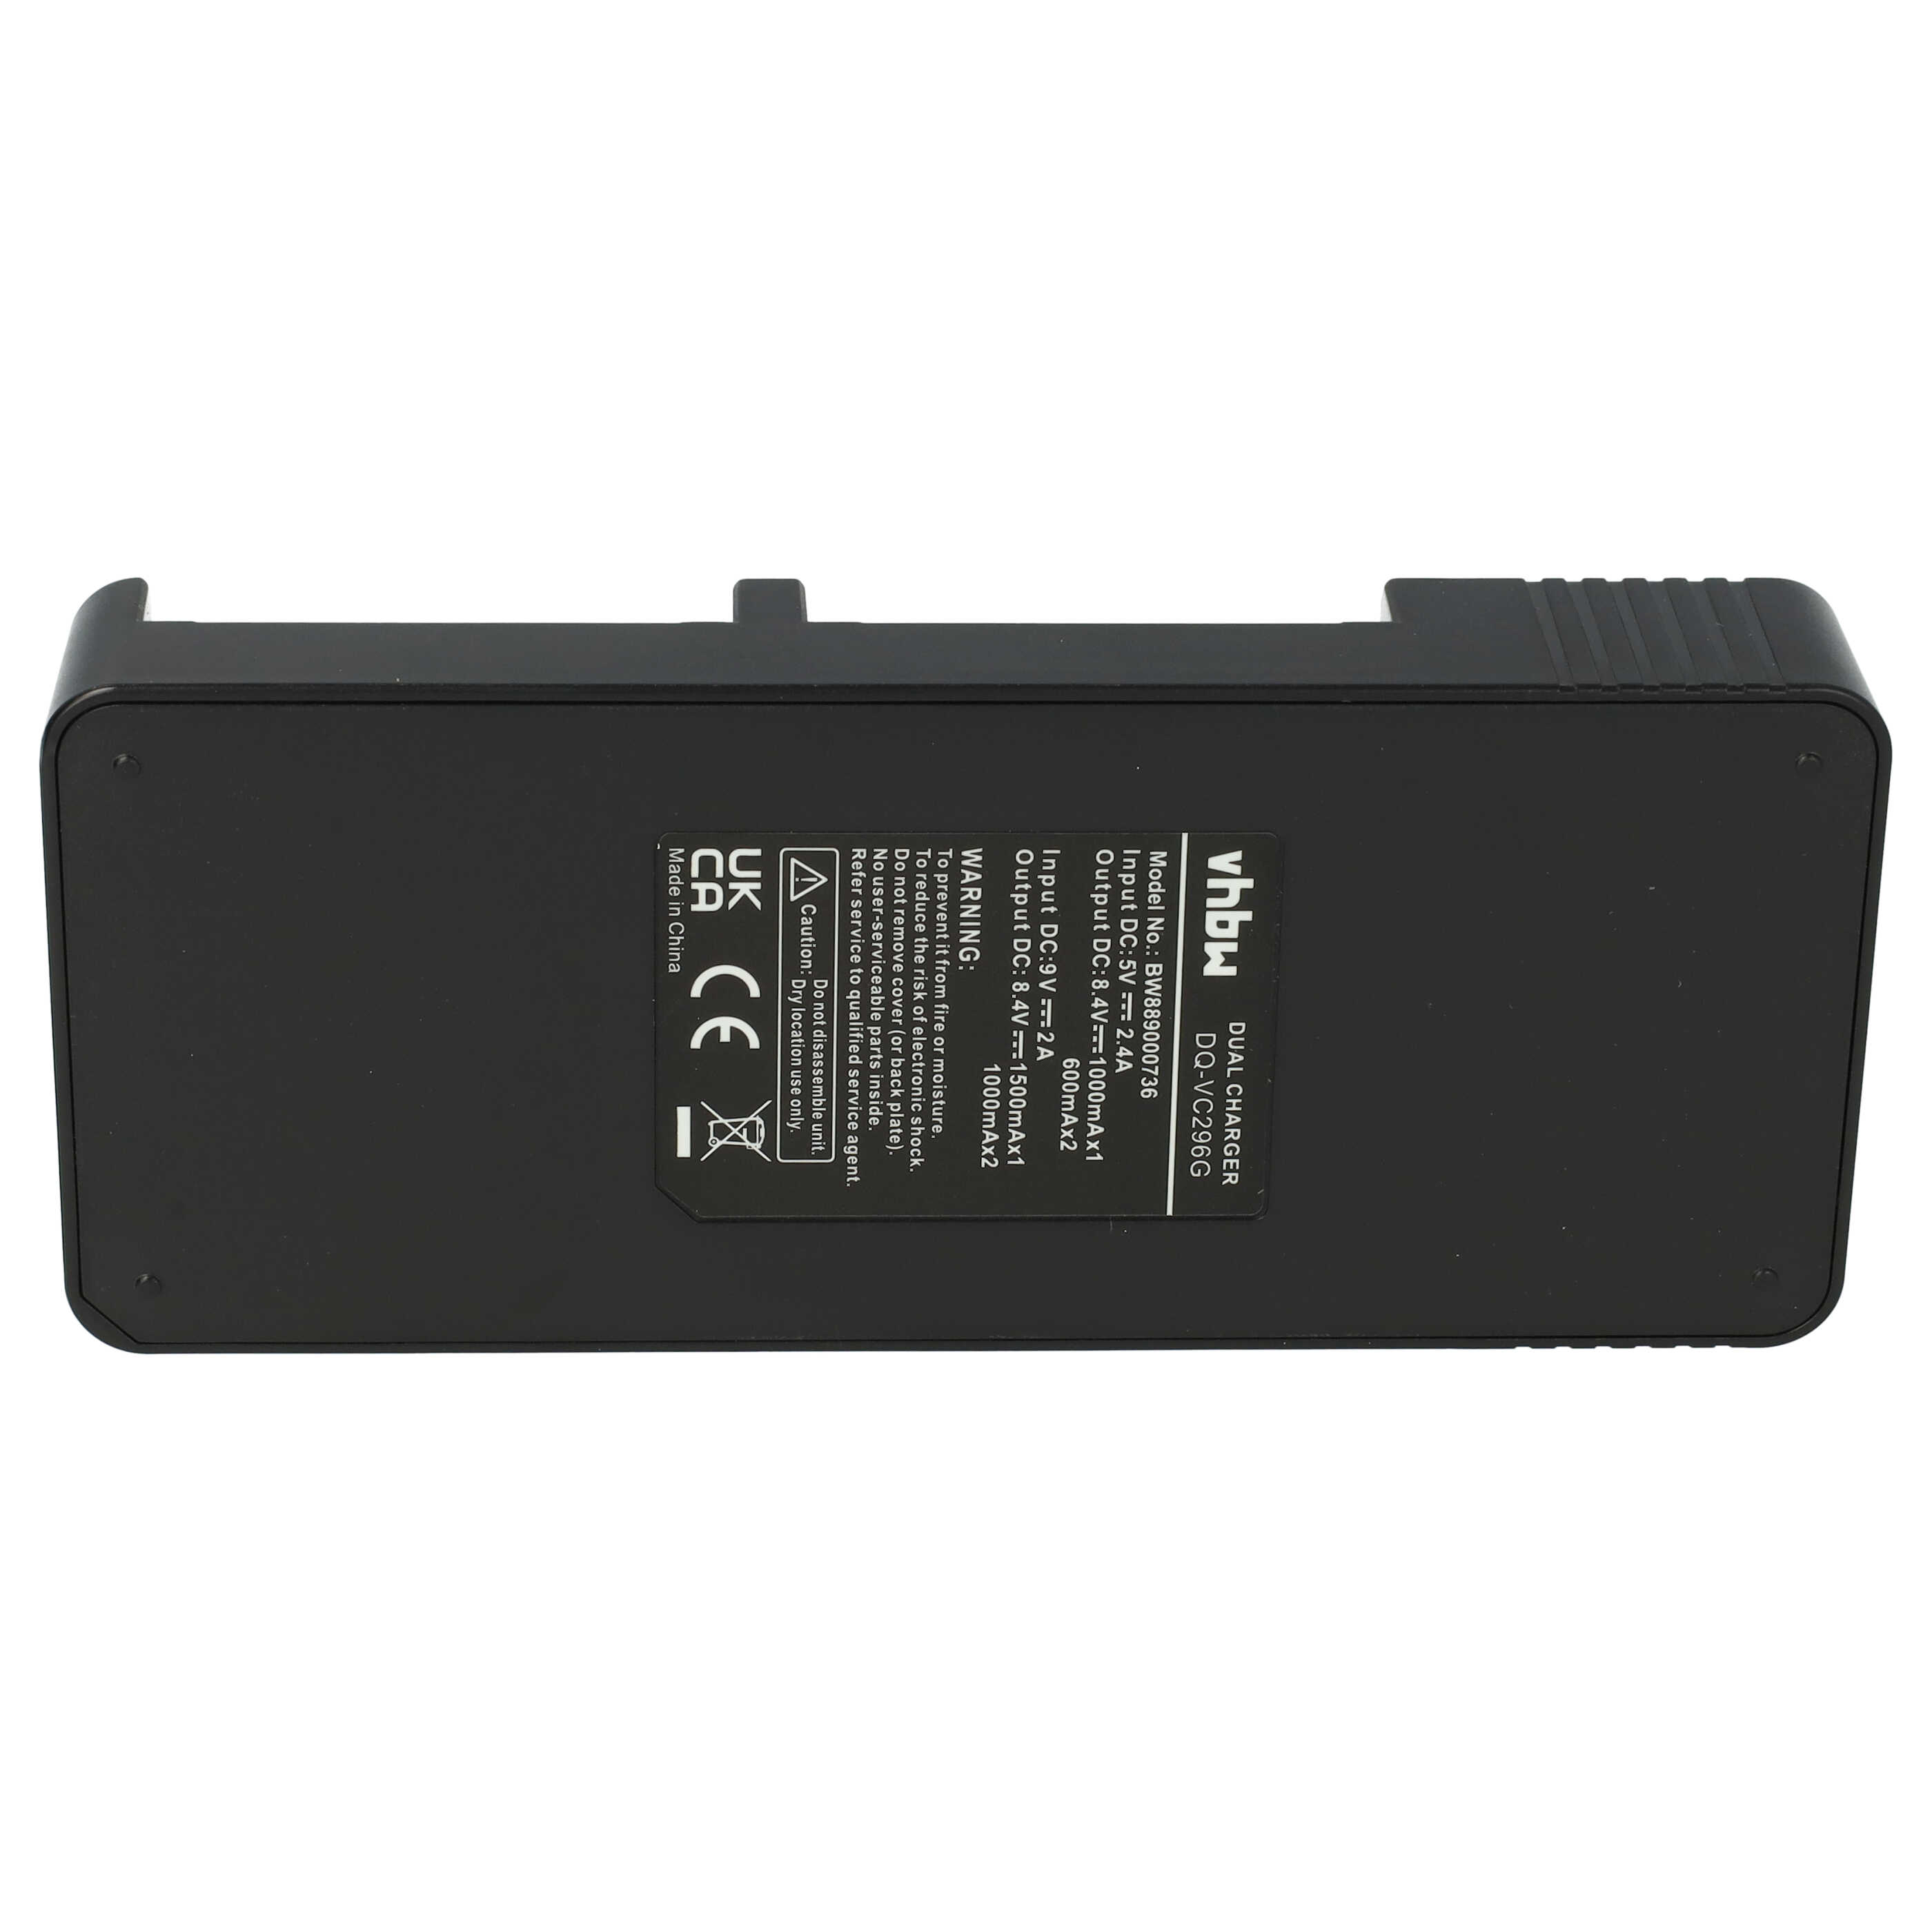 Battery Charger suitable for JVC BN-VC264G Camera 